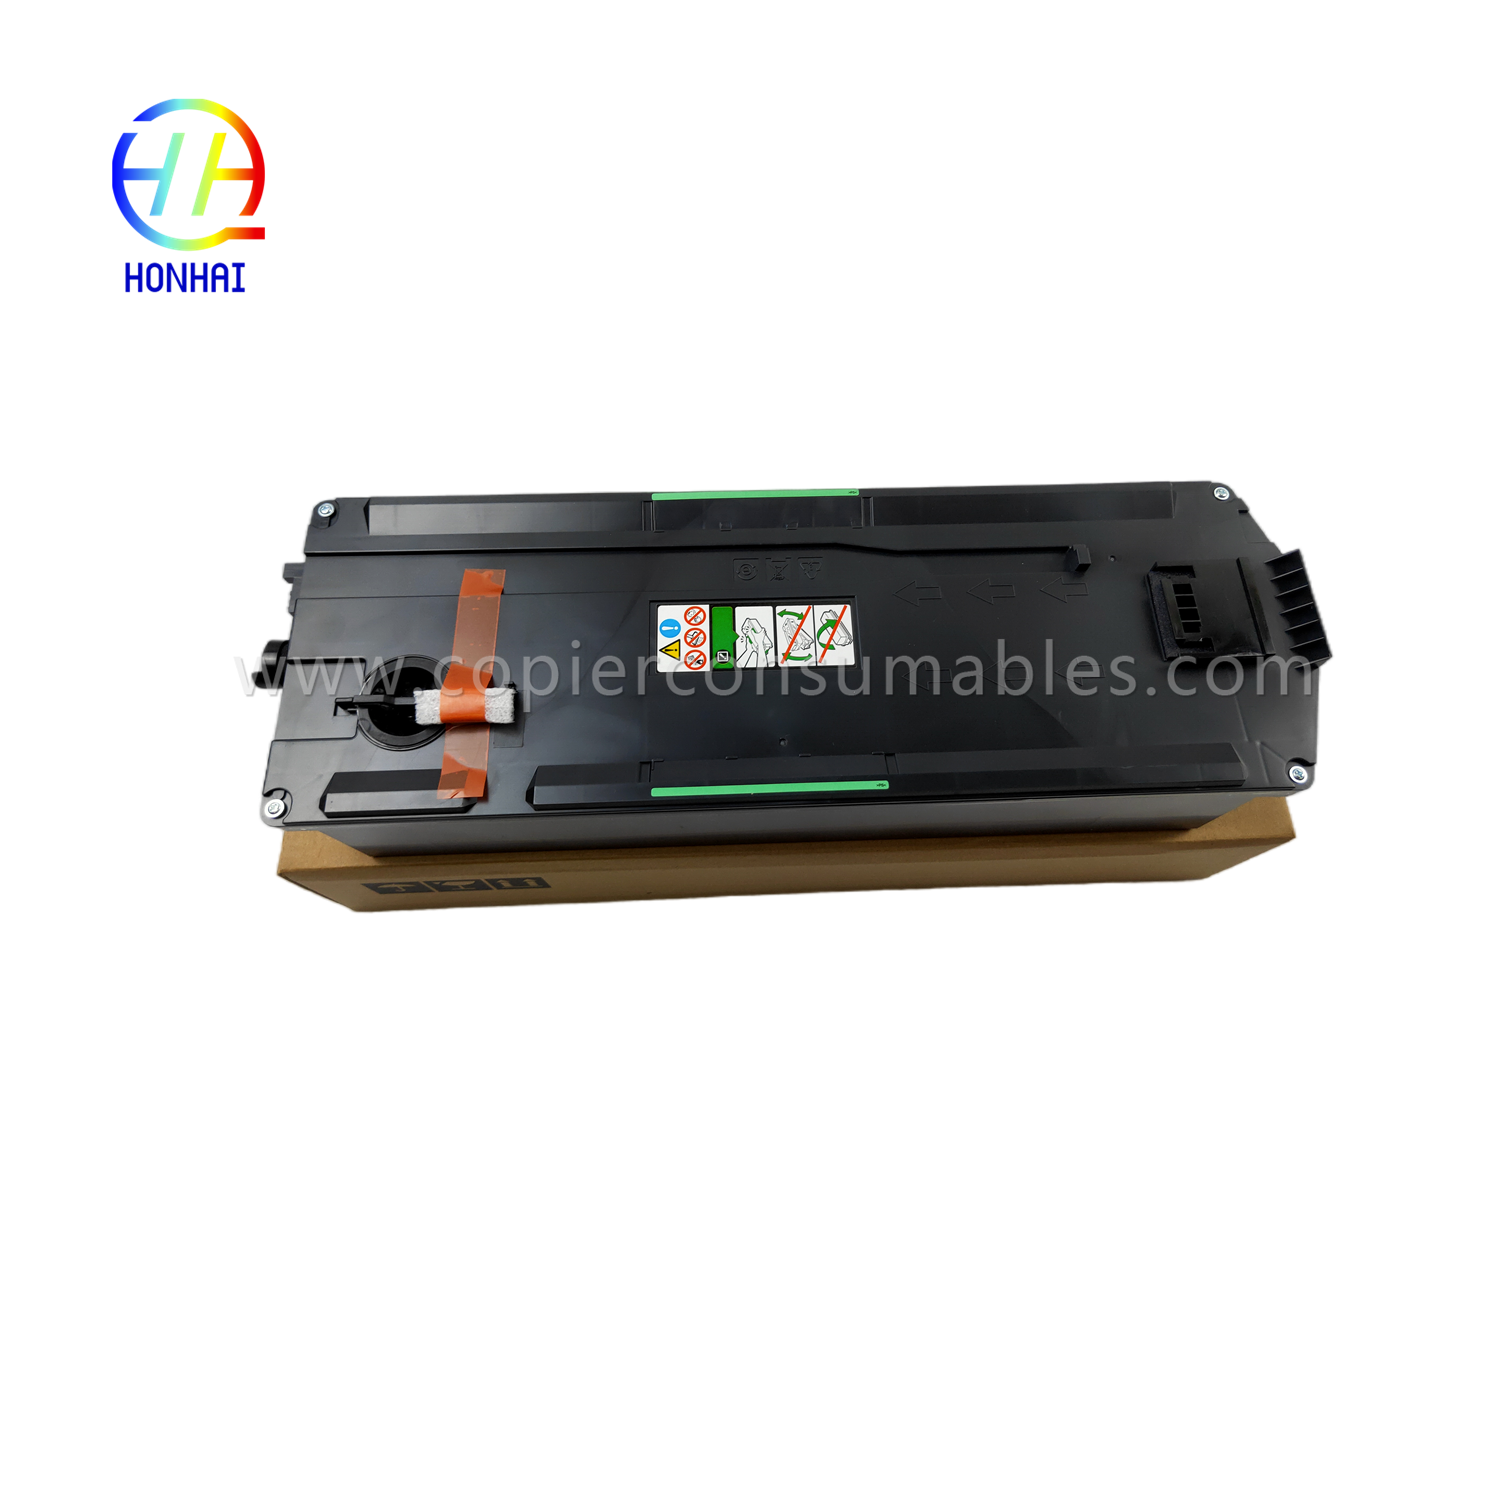 https://c585.goodao.net/waste-toner-bottle-for-ricoh-d2426400-mpc2003-c2004-c2503-c2504-c3003-c3004-c3503-c3504-c4503-c5003-c5003sp-c5003sp-c5003sp udoti-toner-container-product/